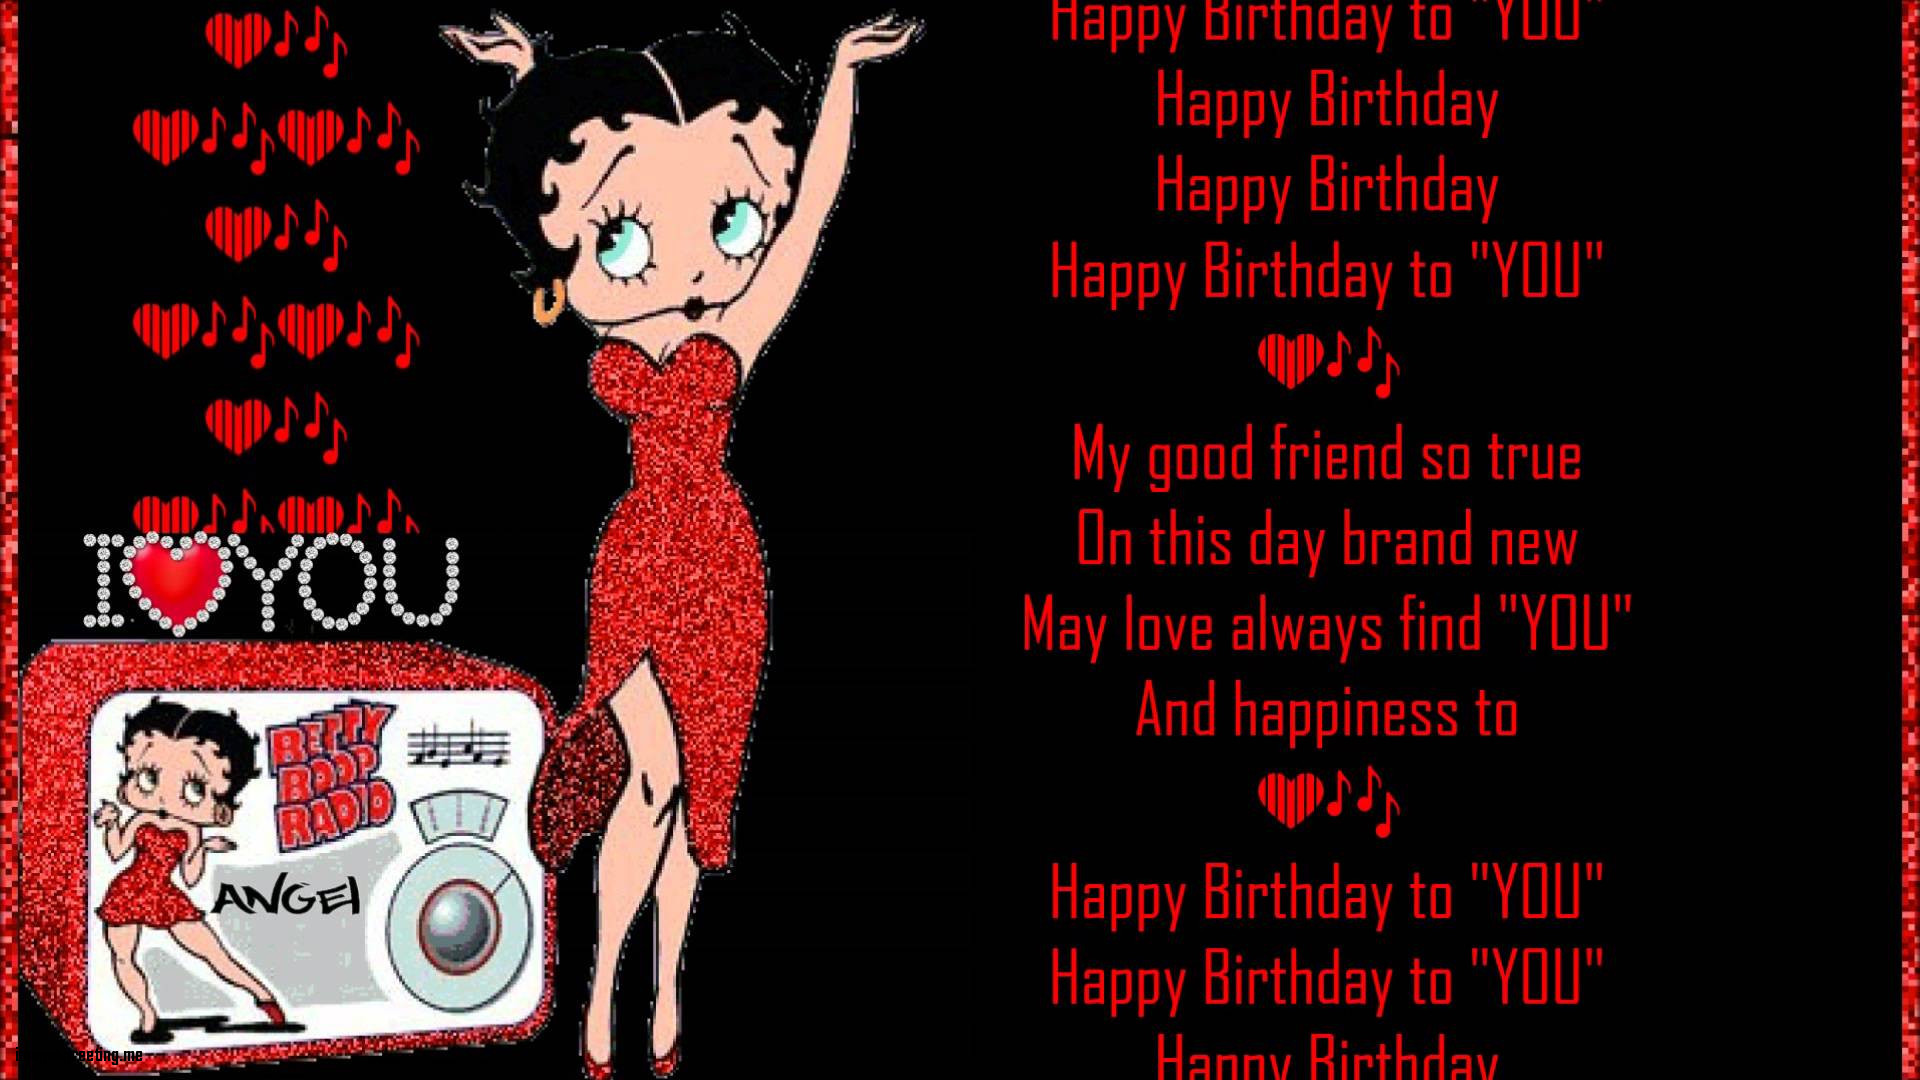 New Betty Boop Happy Birthday Images 3 Hd Wallpapers - Betty Boop Retro - HD Wallpaper 